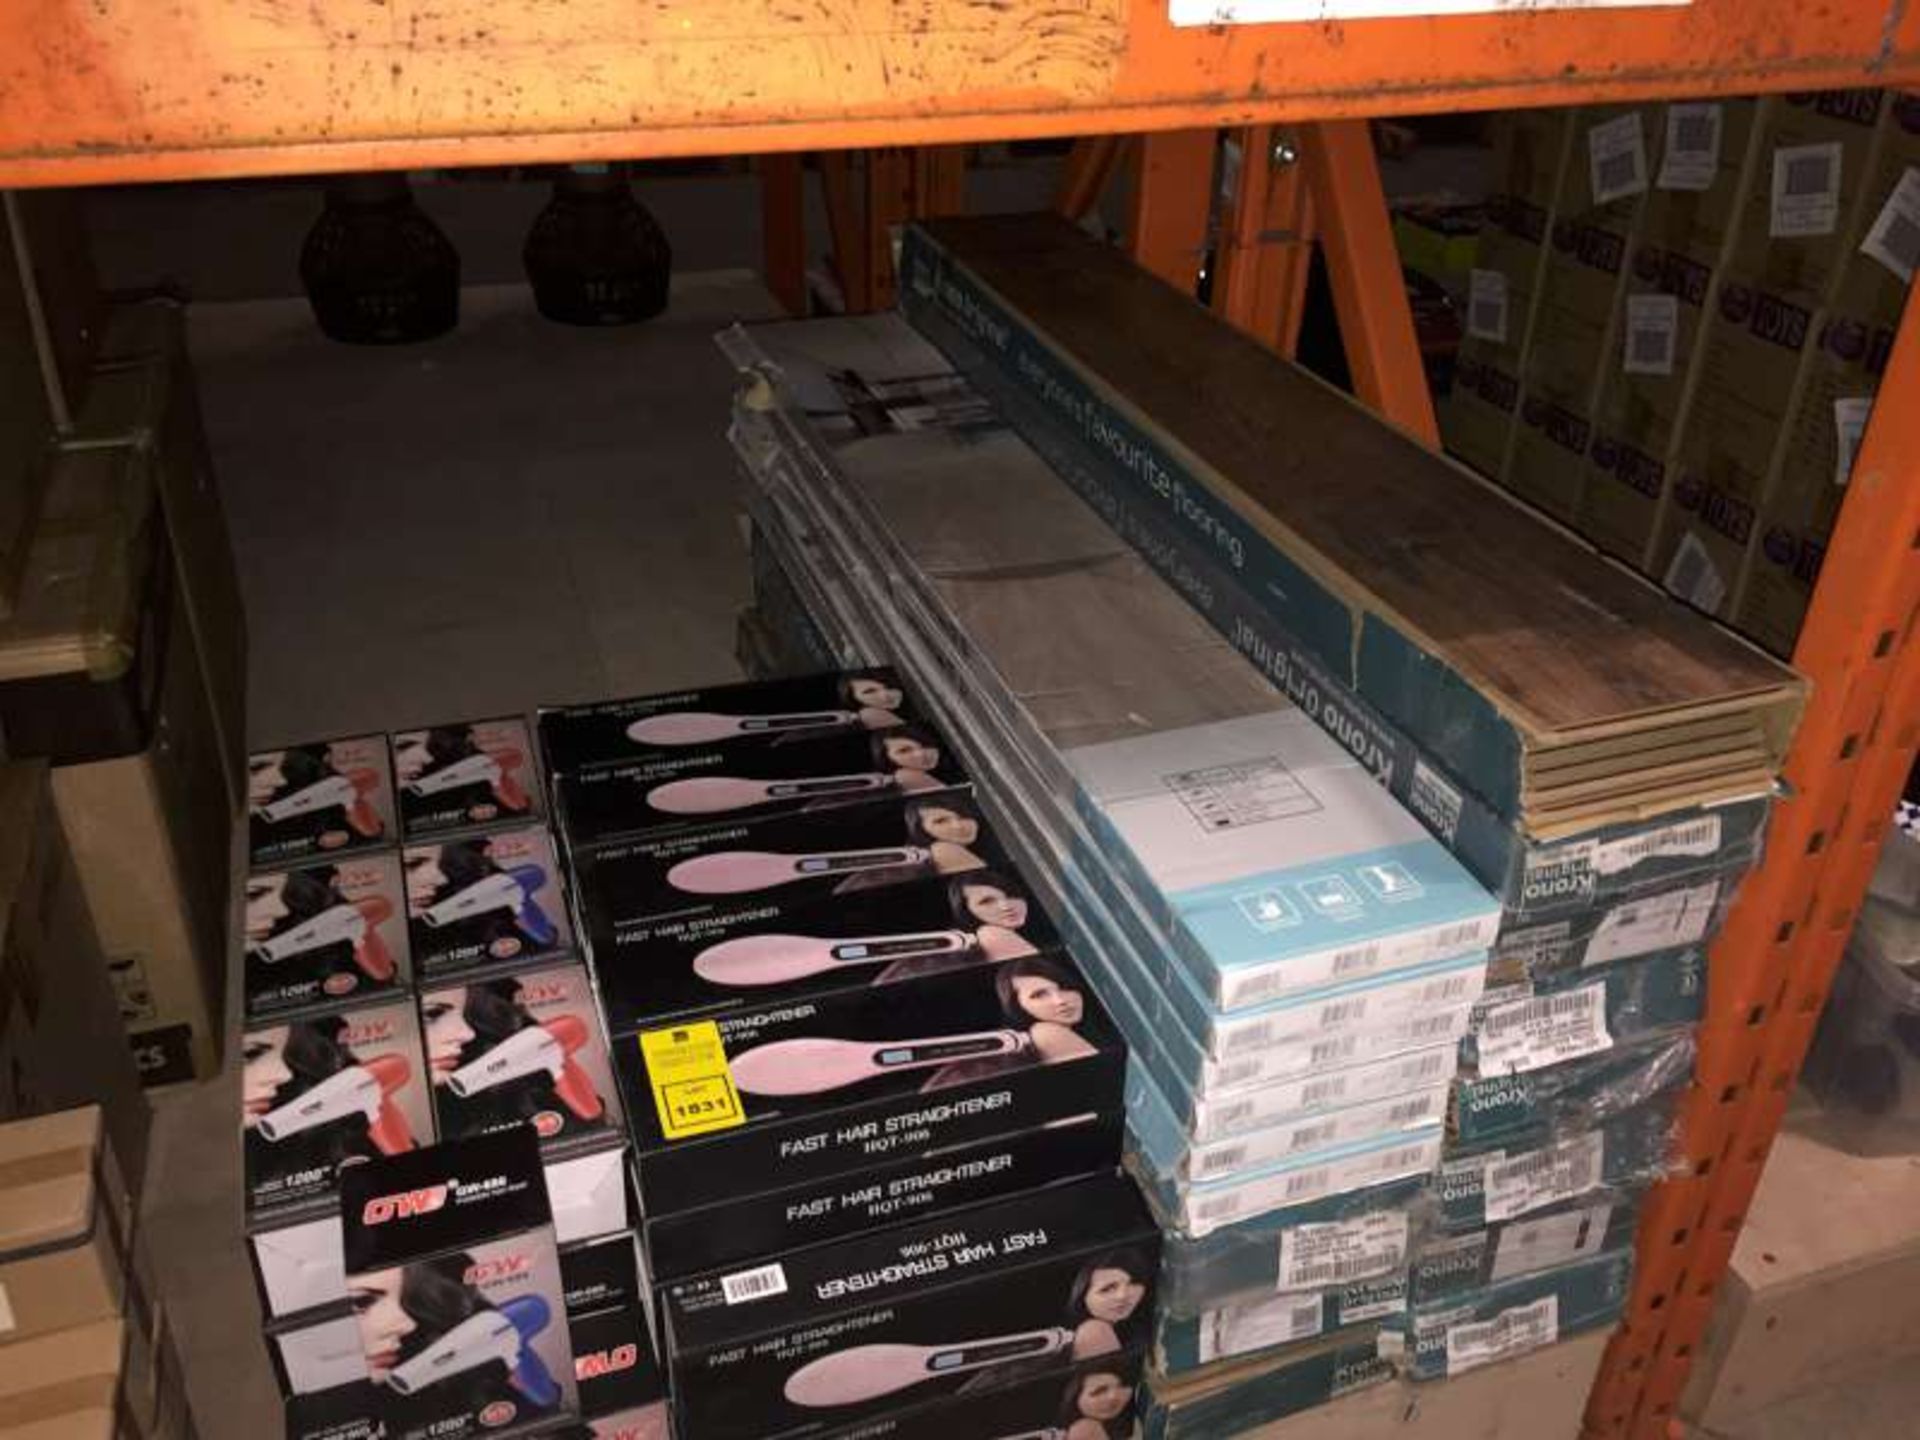 LOT CONTAINING LAMINATE FLOORING, 32 X FAST HAIR STRAIGHTENERS, 27 X FOLDABLE HAIR DRYERS